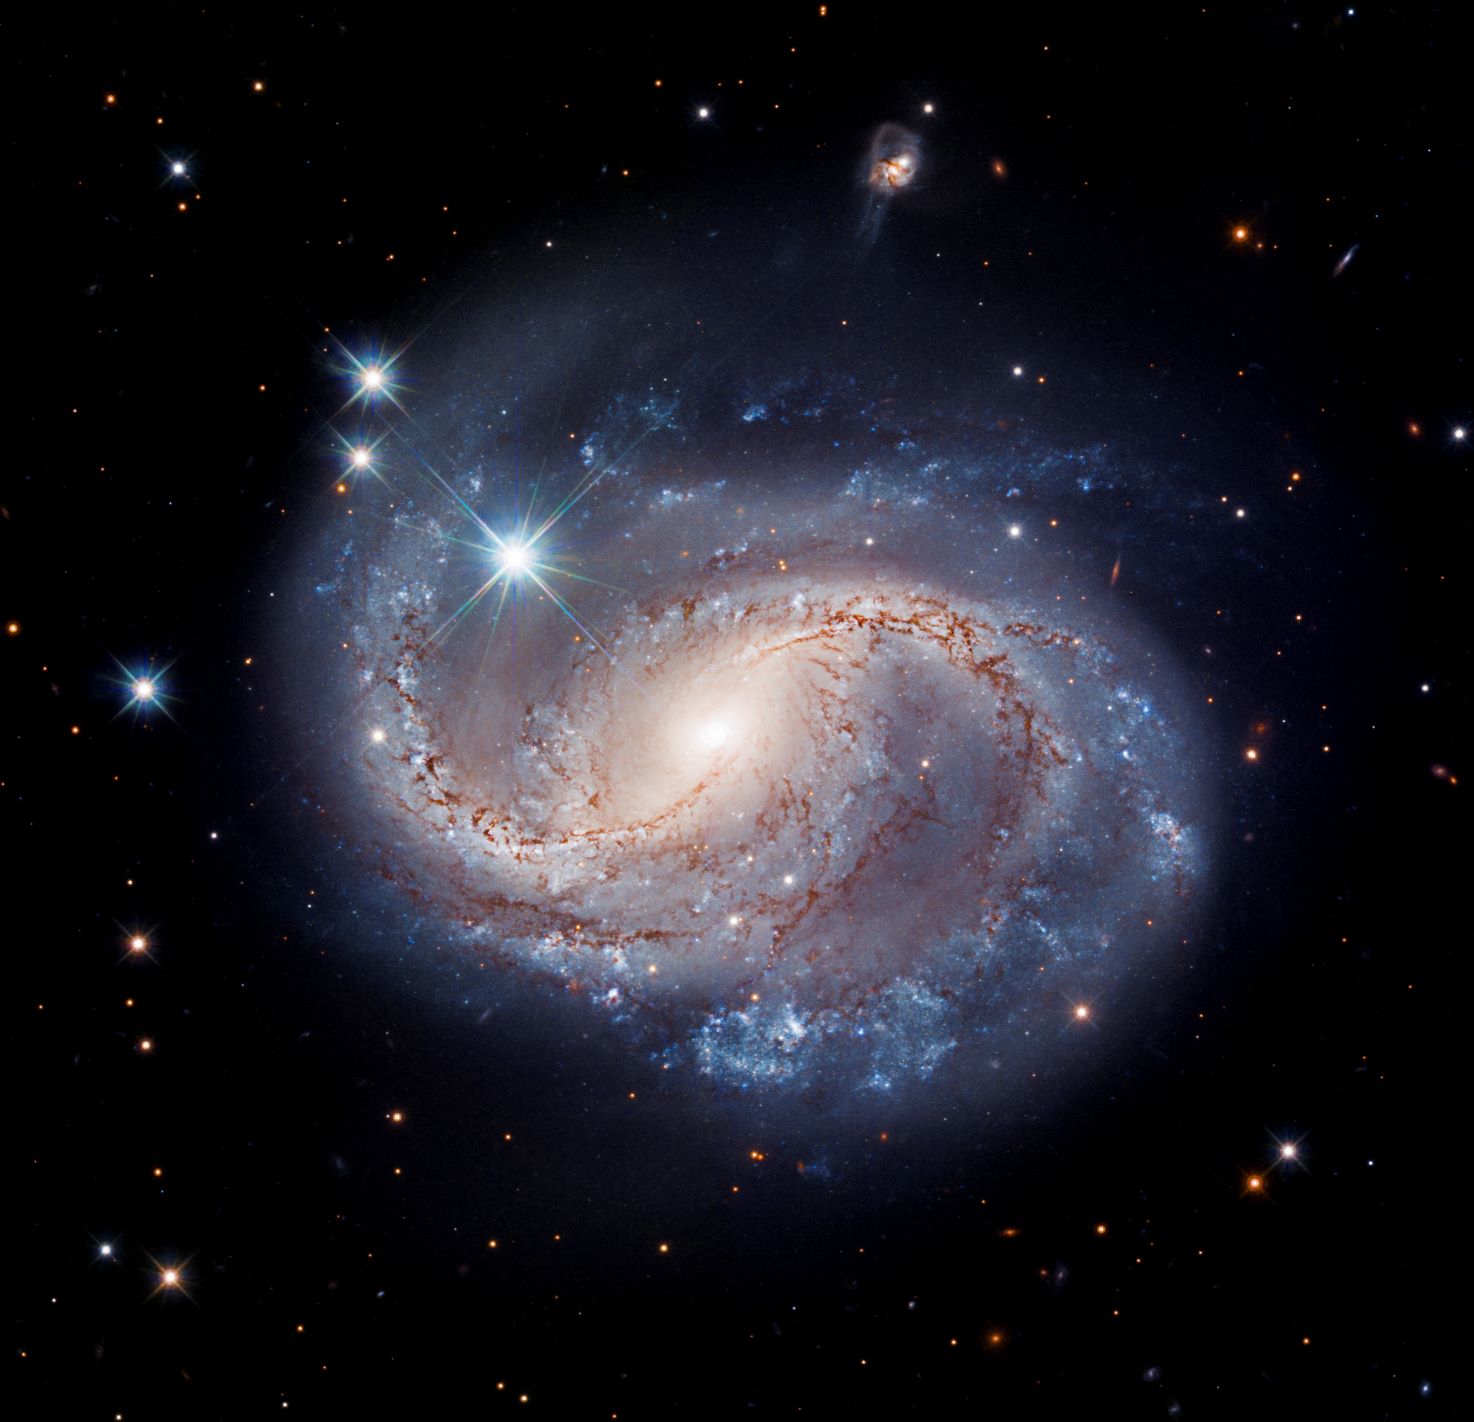 Blue swirls of spiral galaxy NGC 6956 stand out radiantly in this latest Hubble image